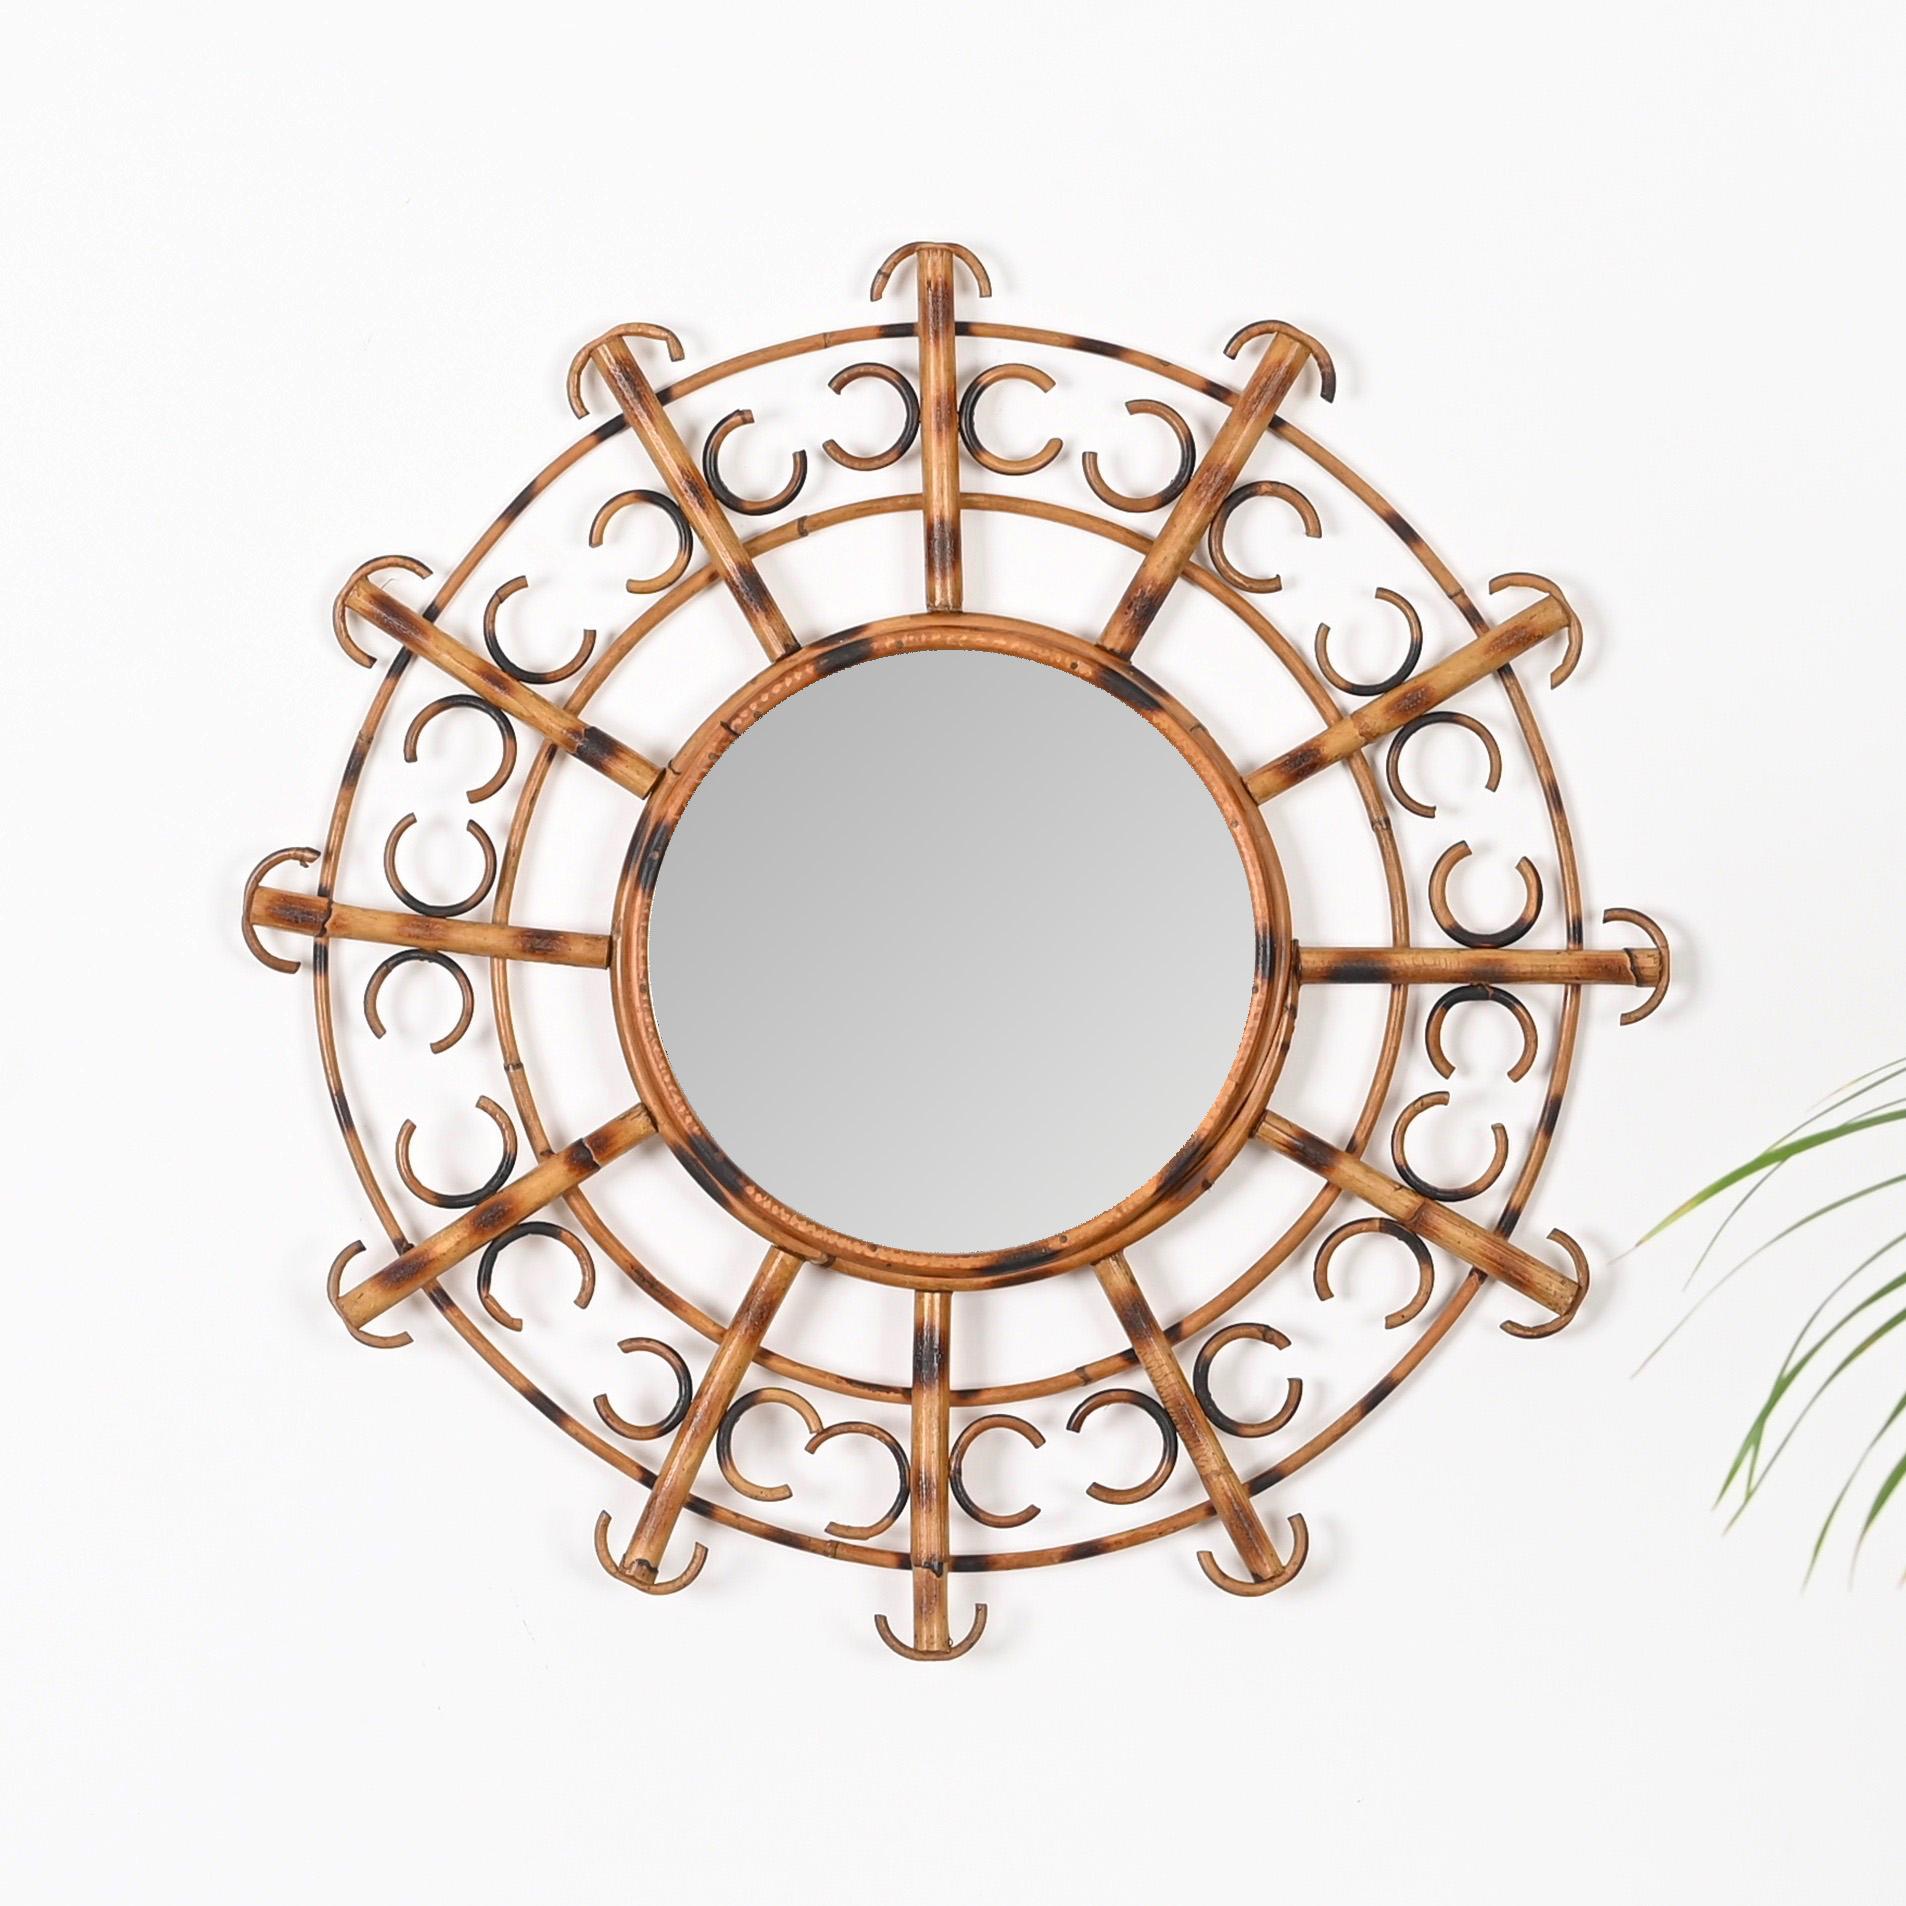 Mid-Century Modern Mid-Century French Riviera Round Mirror in Rattan, France, 1950s For Sale